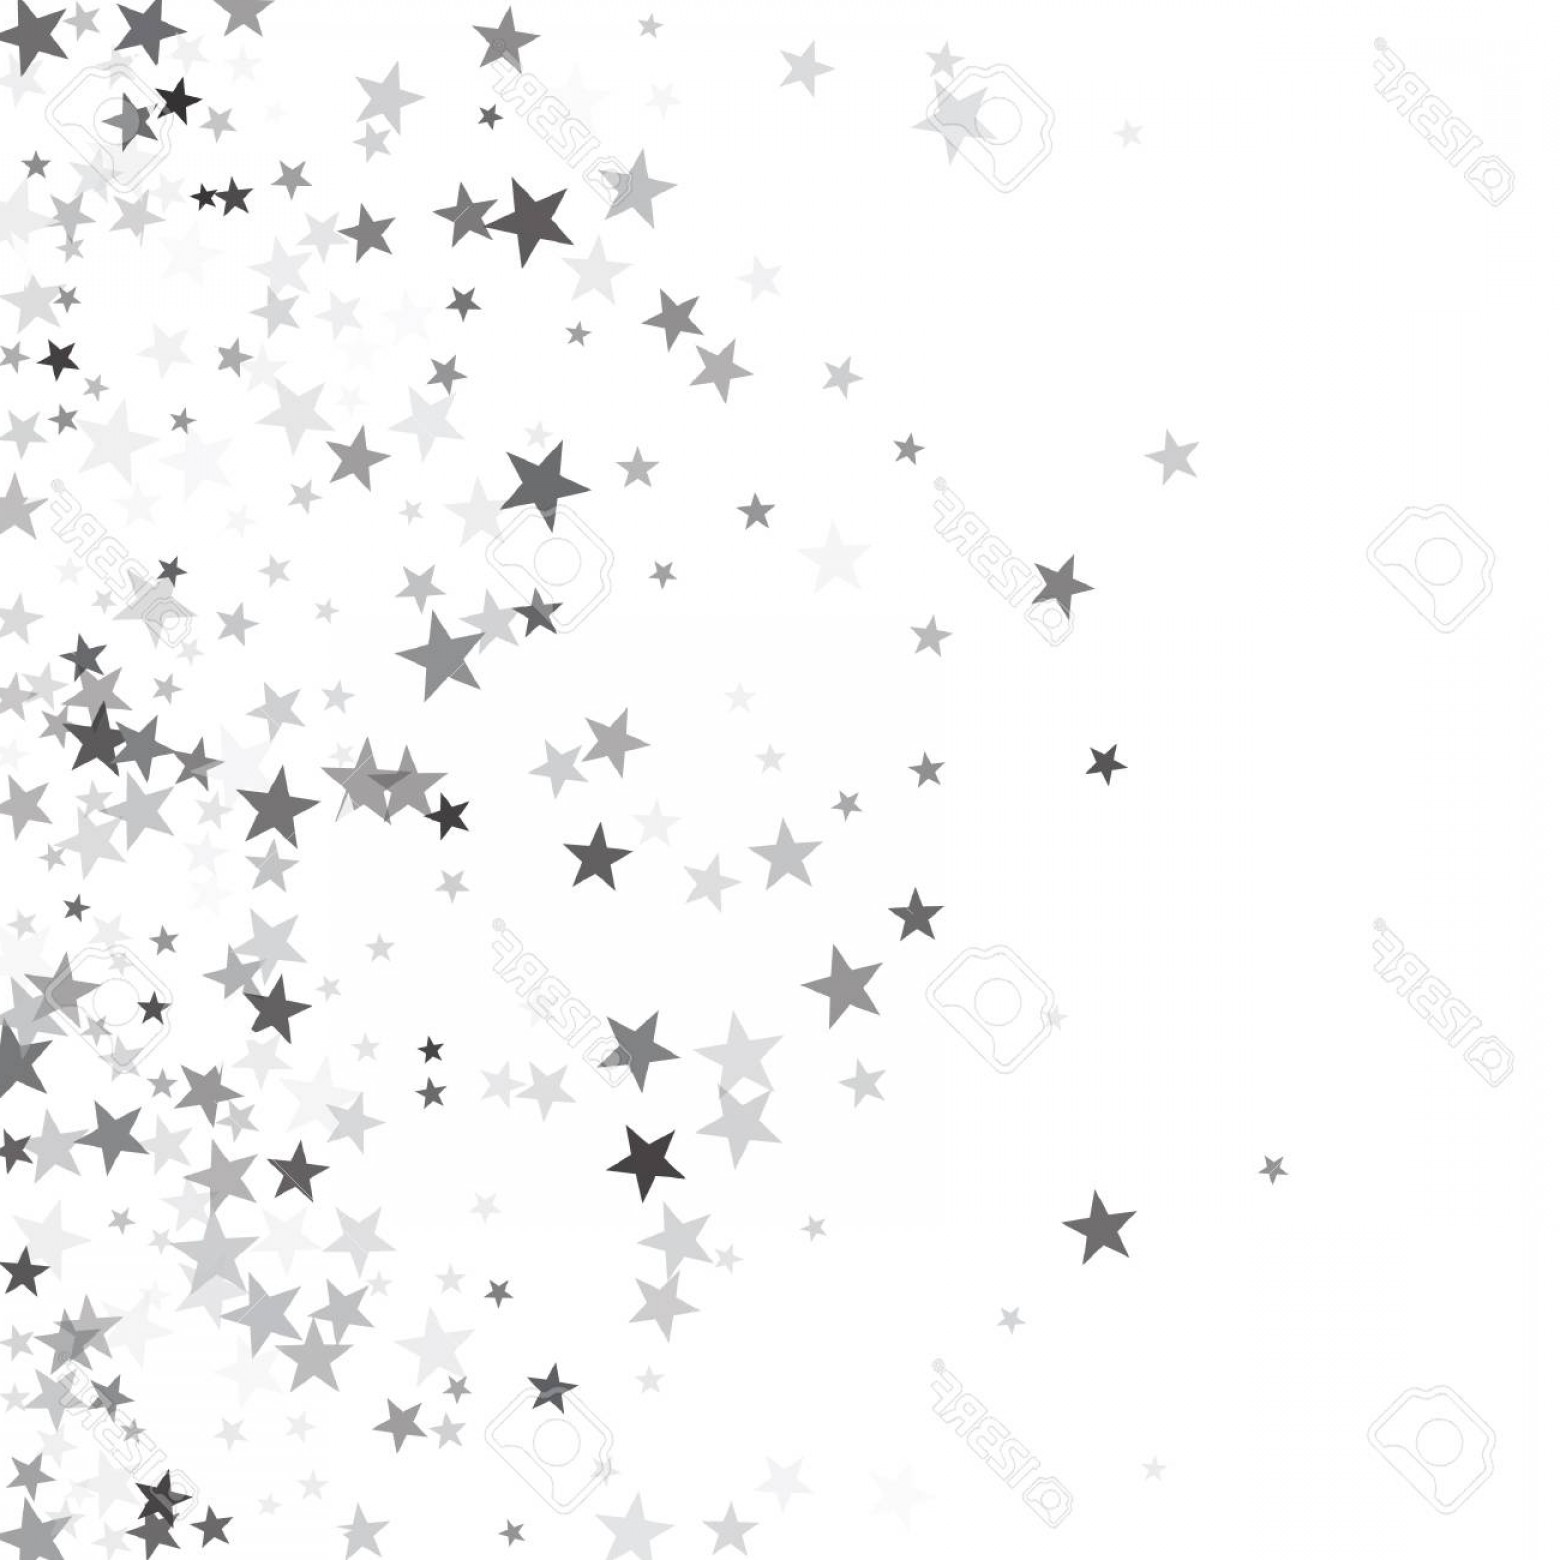 Free Shooting Star Clipart party, Download Free Clip Art on